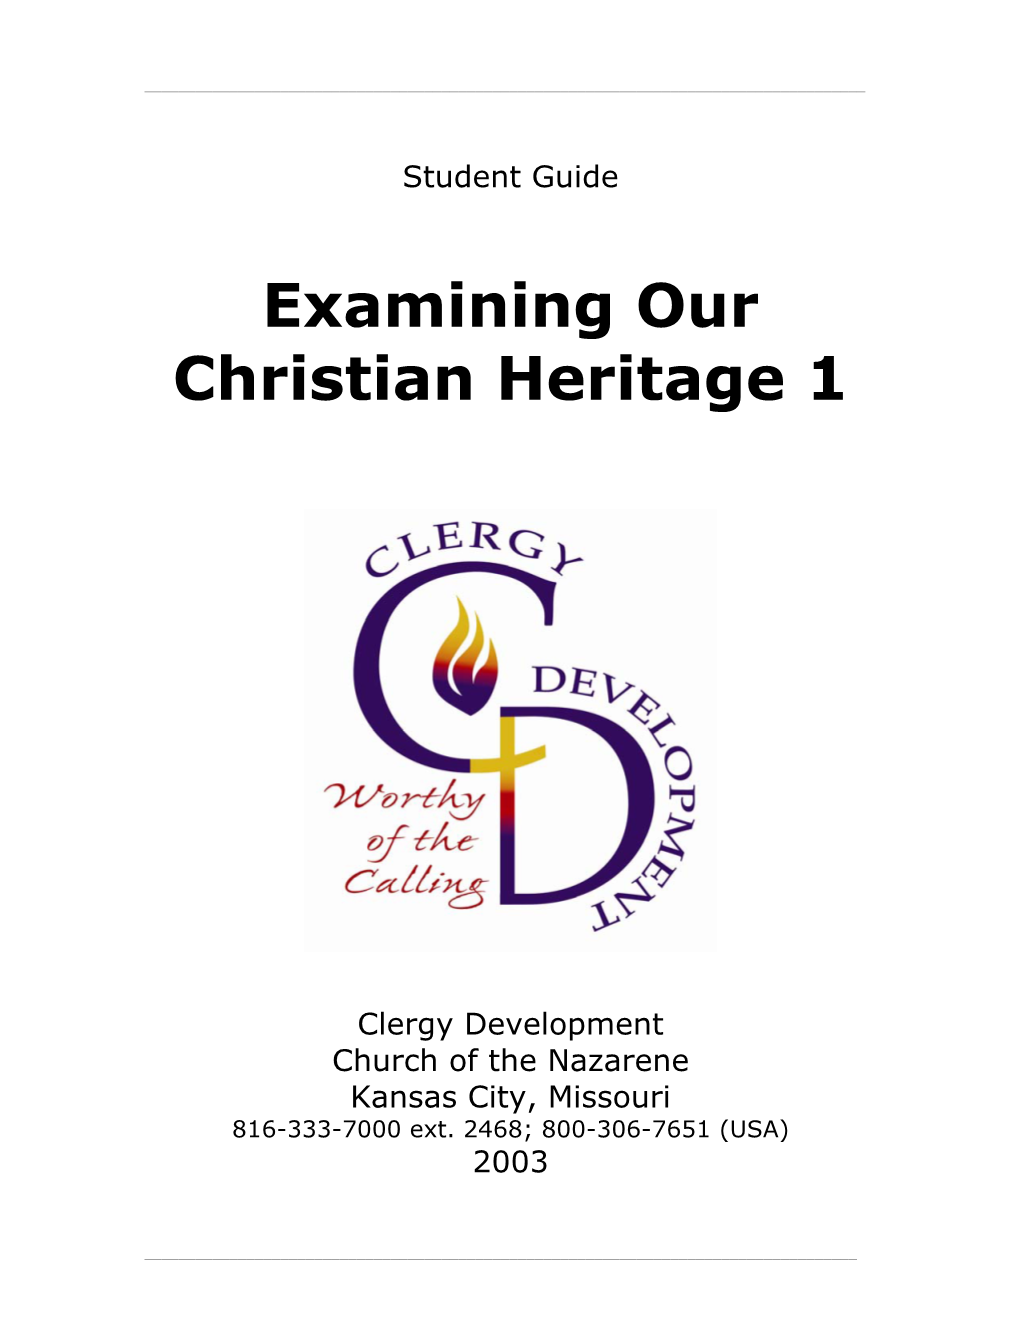 Examining Our Christian Heritage 1